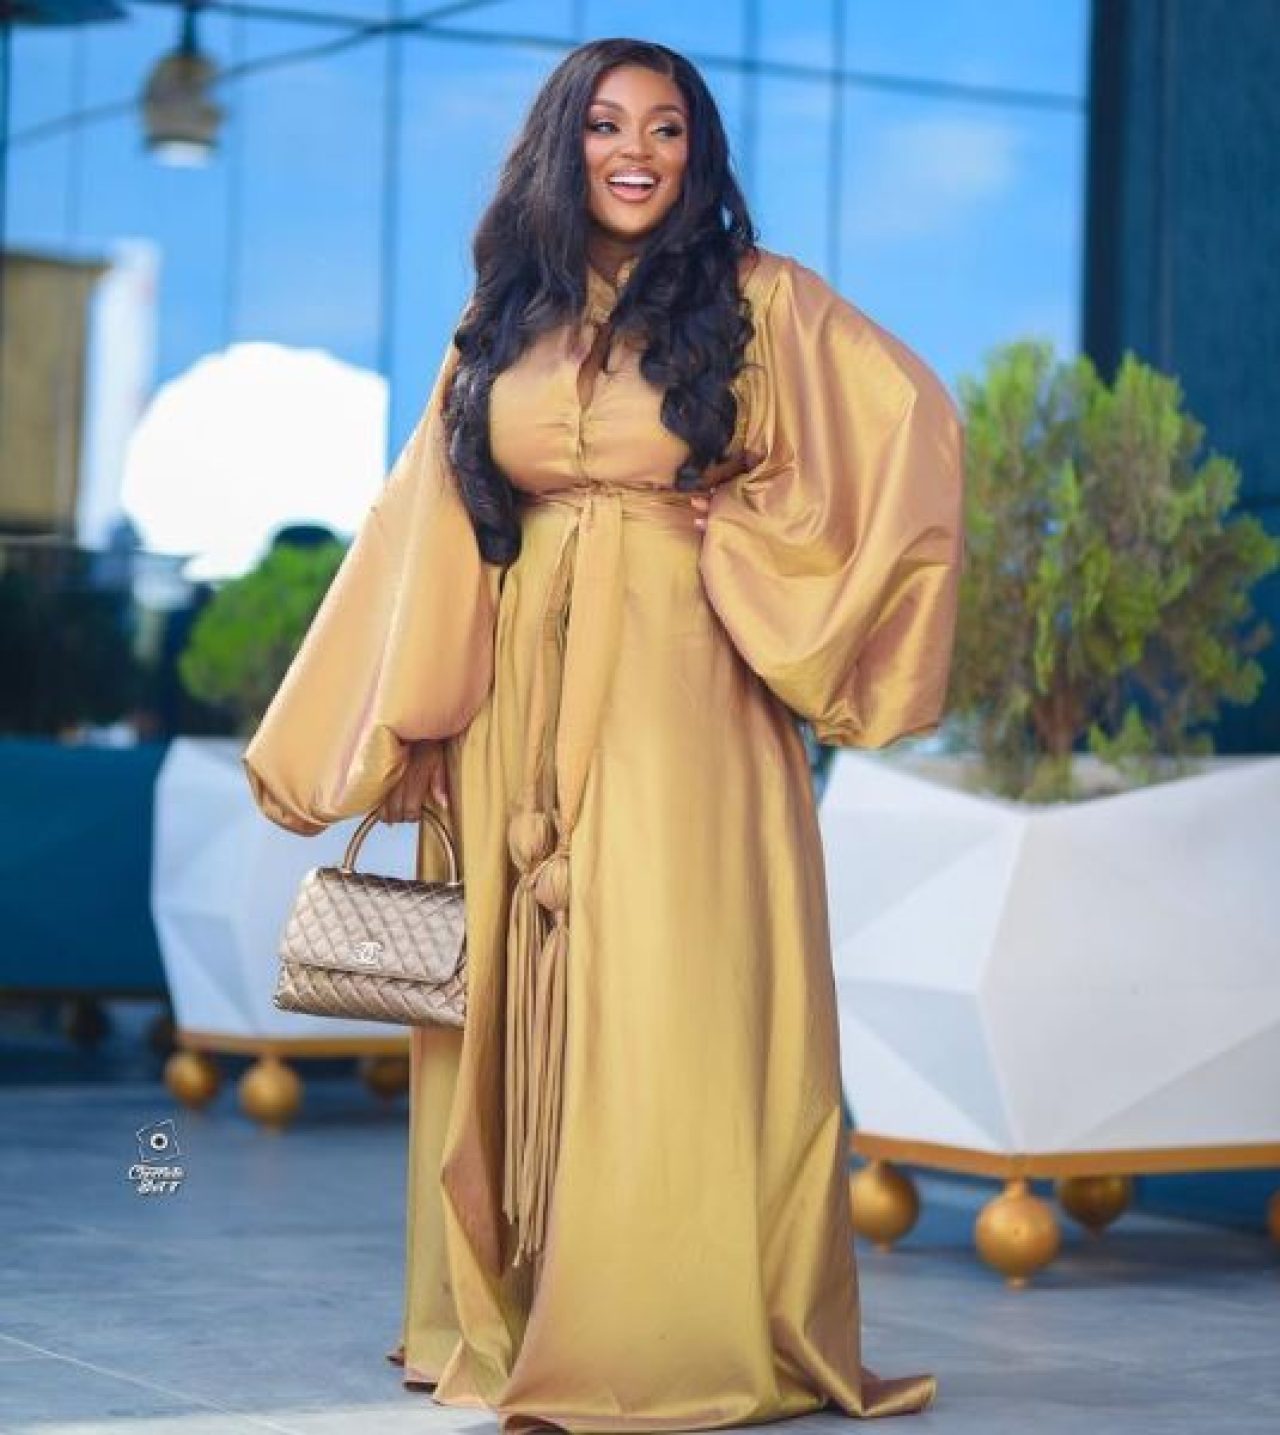 Jackie Appiah's stance on LGBTQ causes a stir. Afro News Wire